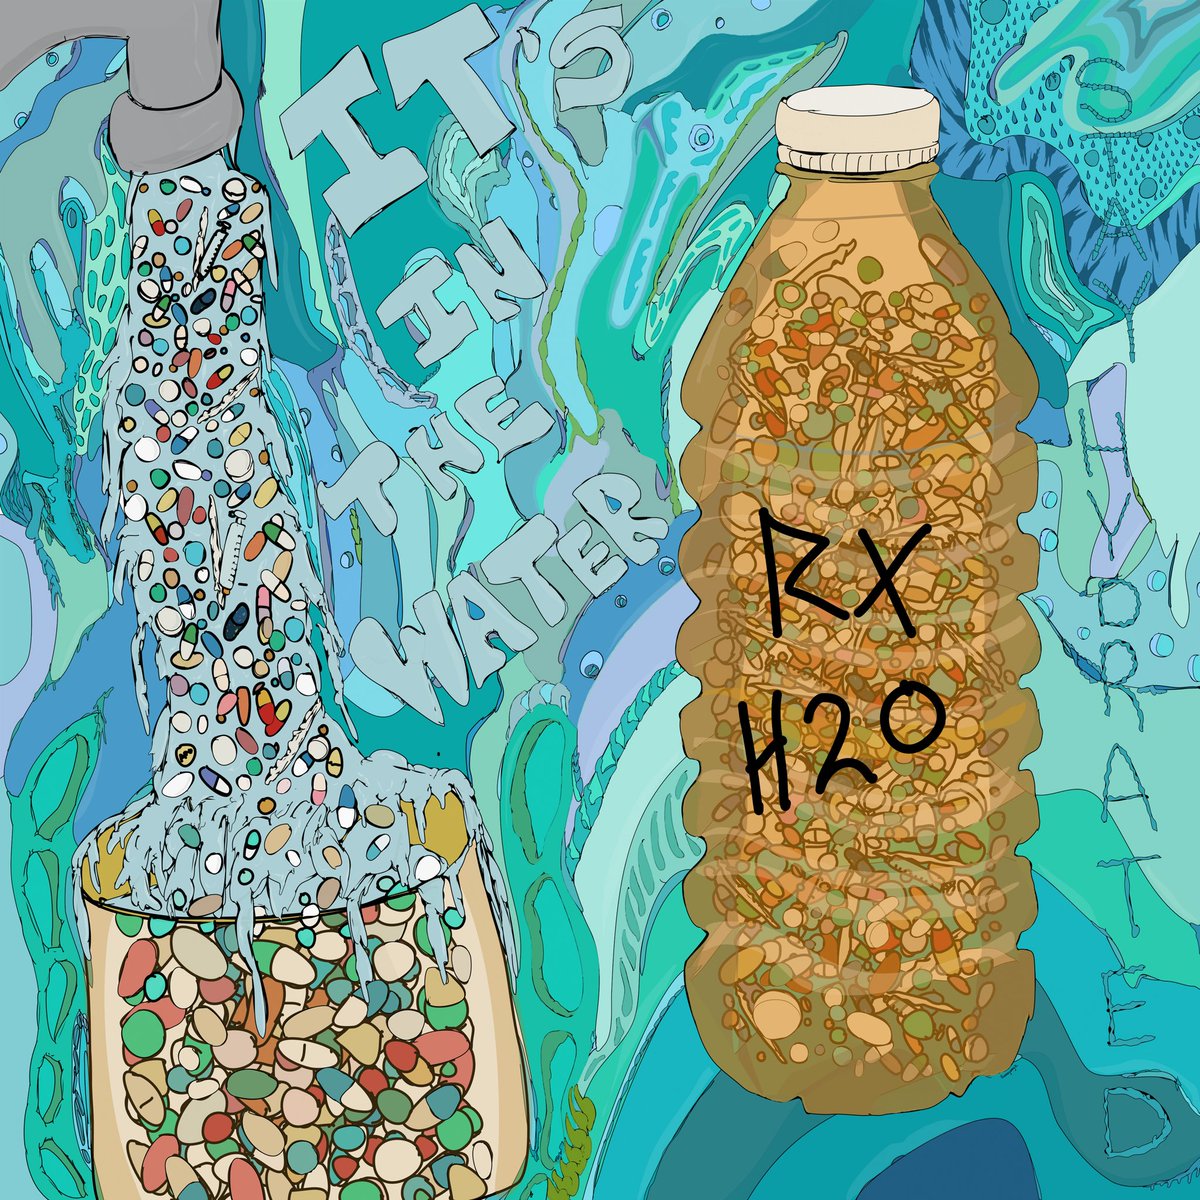 Drink the water…
Stay Hydrated… 💊💉💧

Art: RX H20